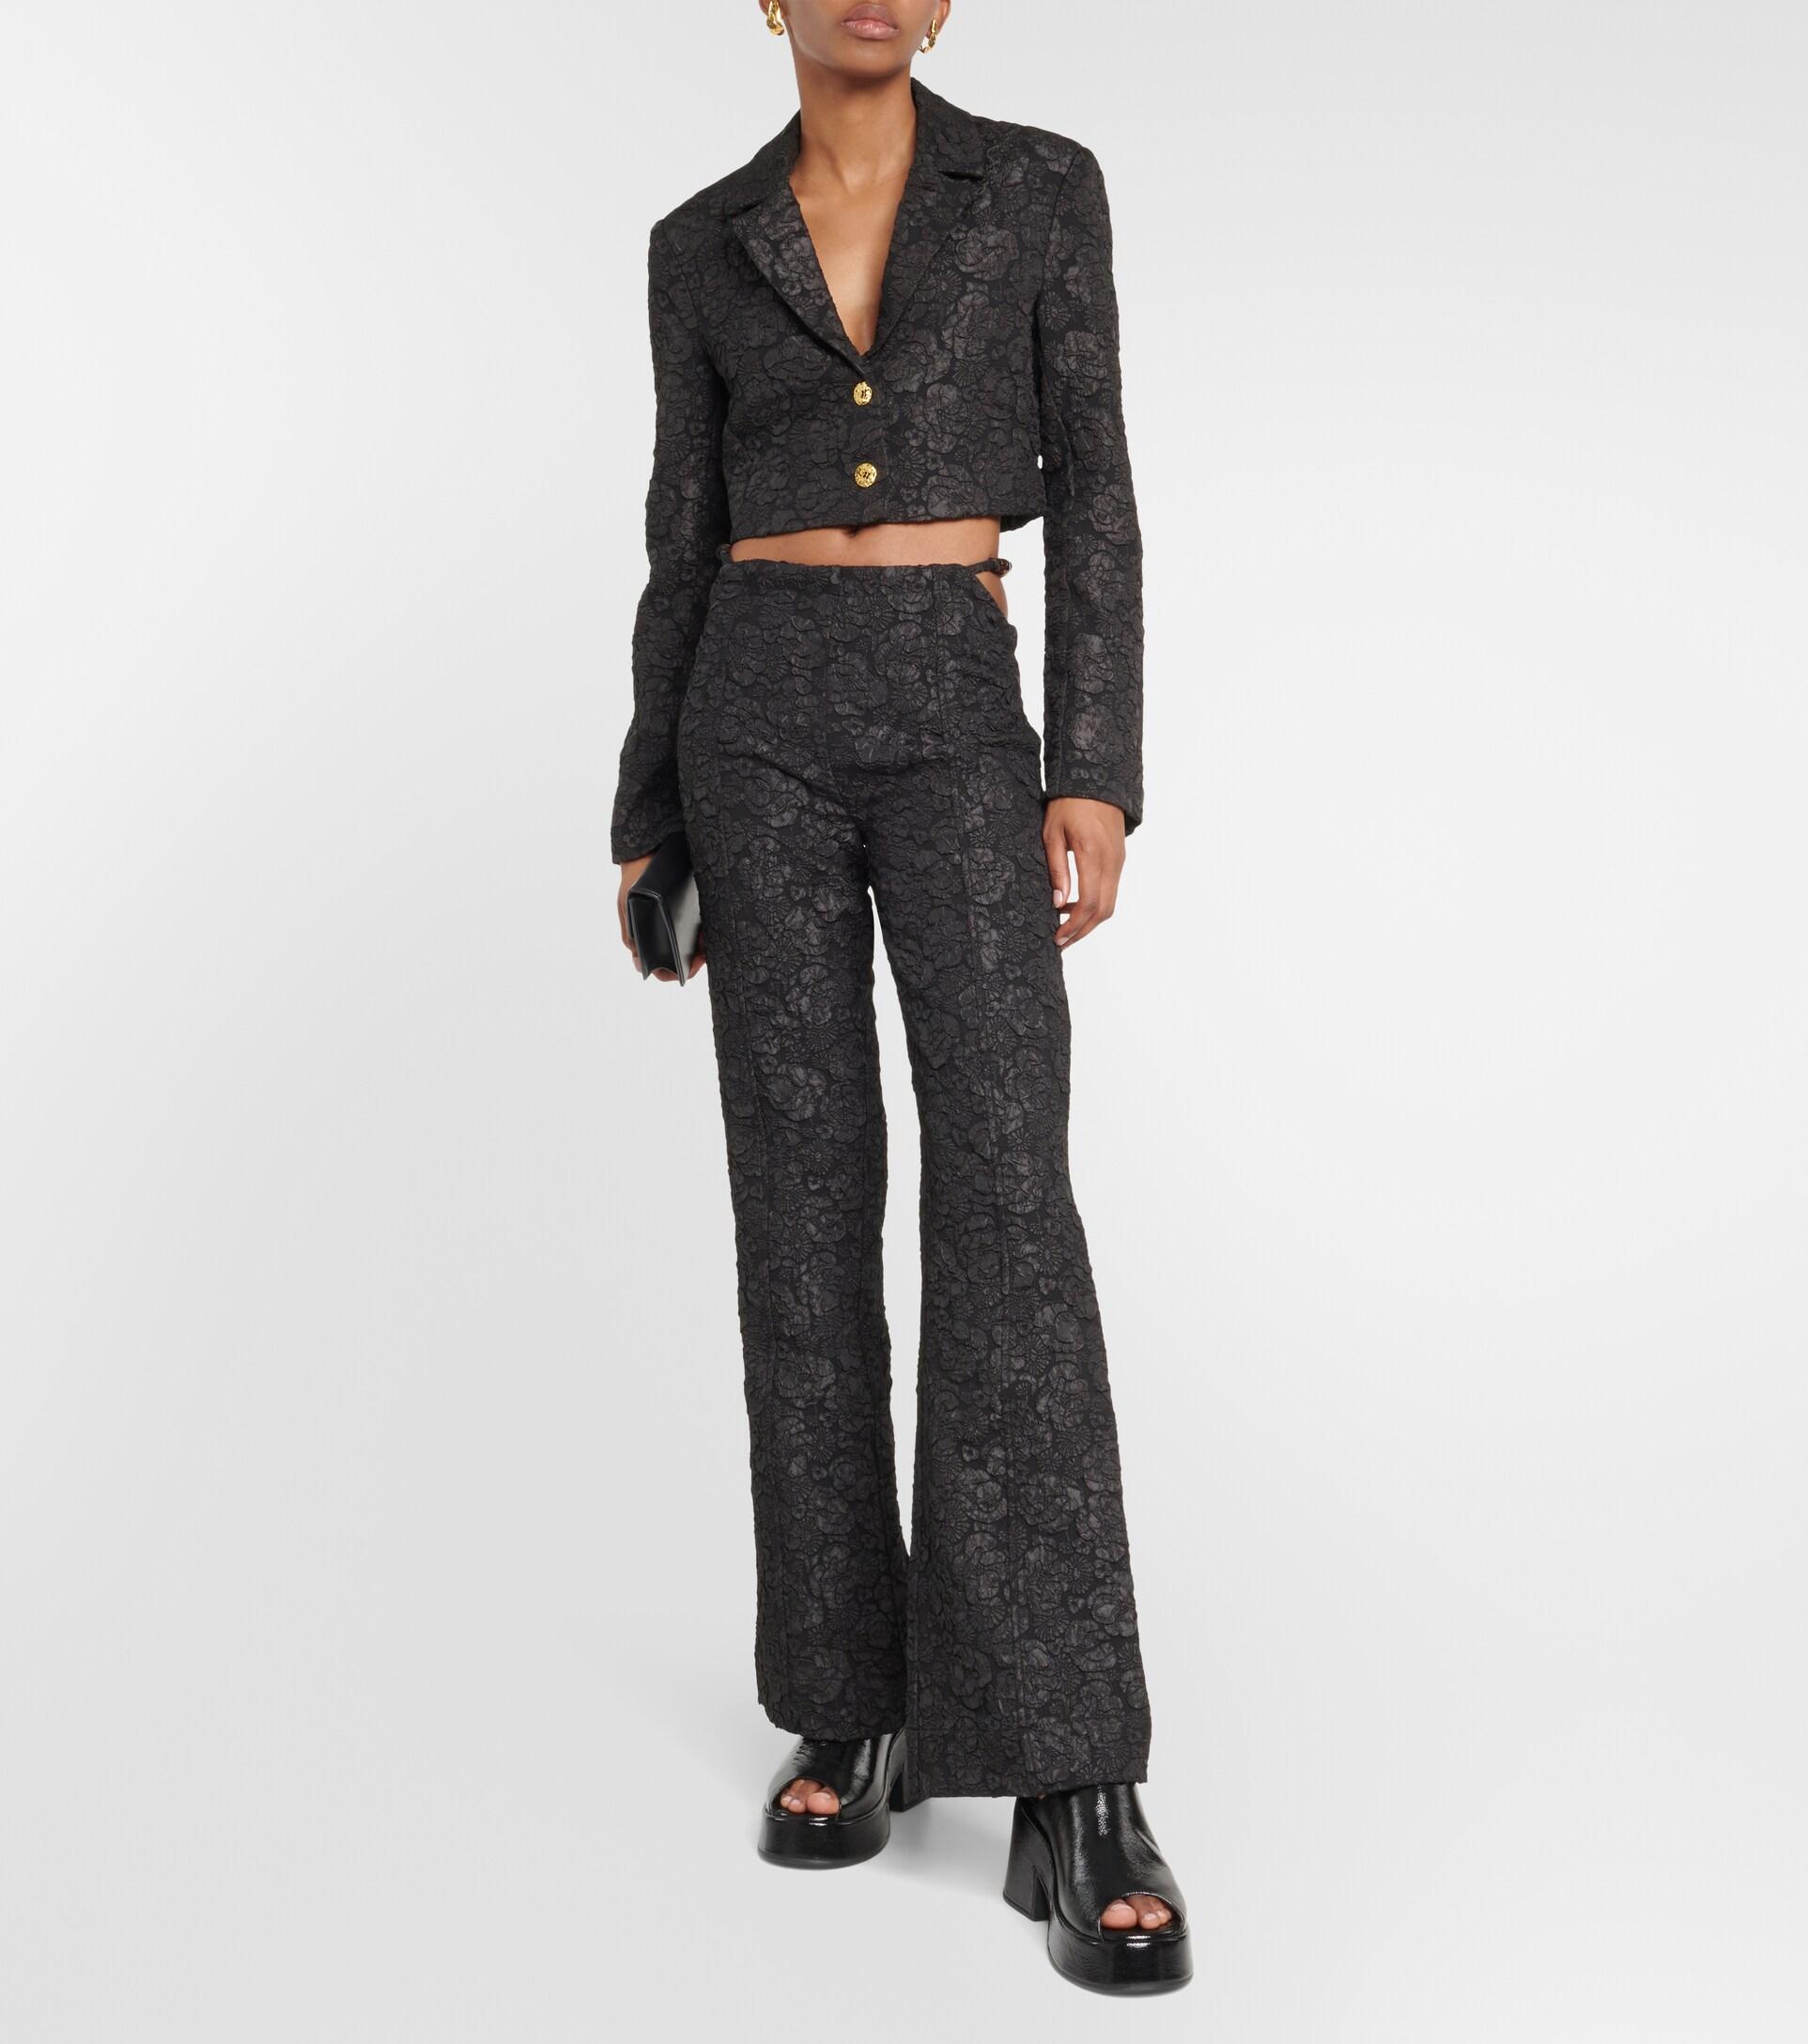 Ganni Jacquard Low-rise Flared Pants in Black | Lyst